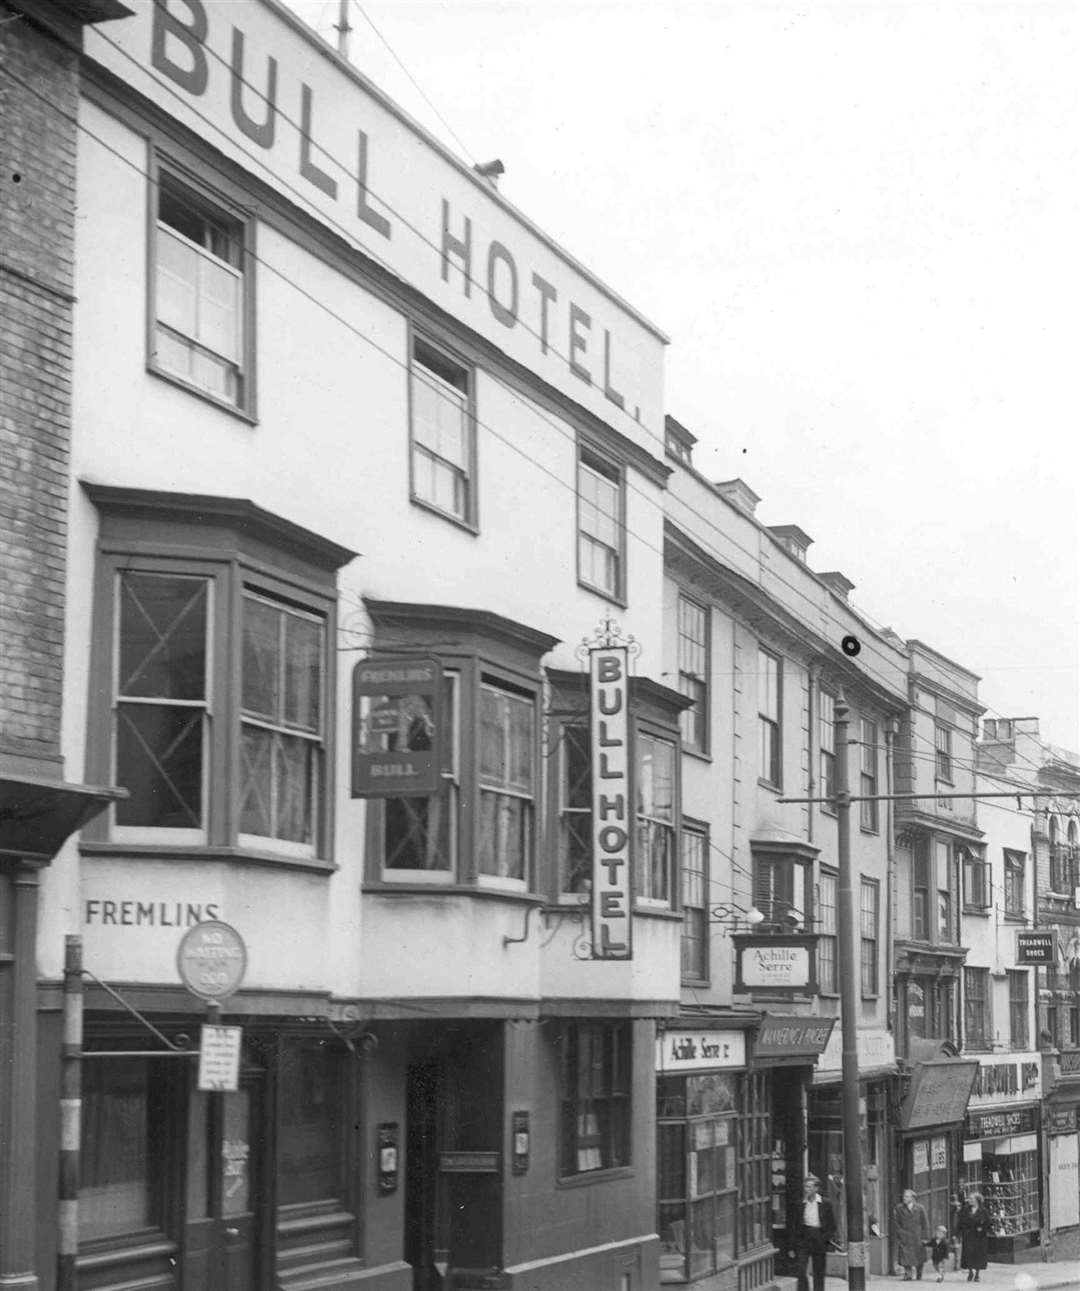 The Bull Hotel in Gabriel's Hill, Maidstone. Picture: Images of Maidstone